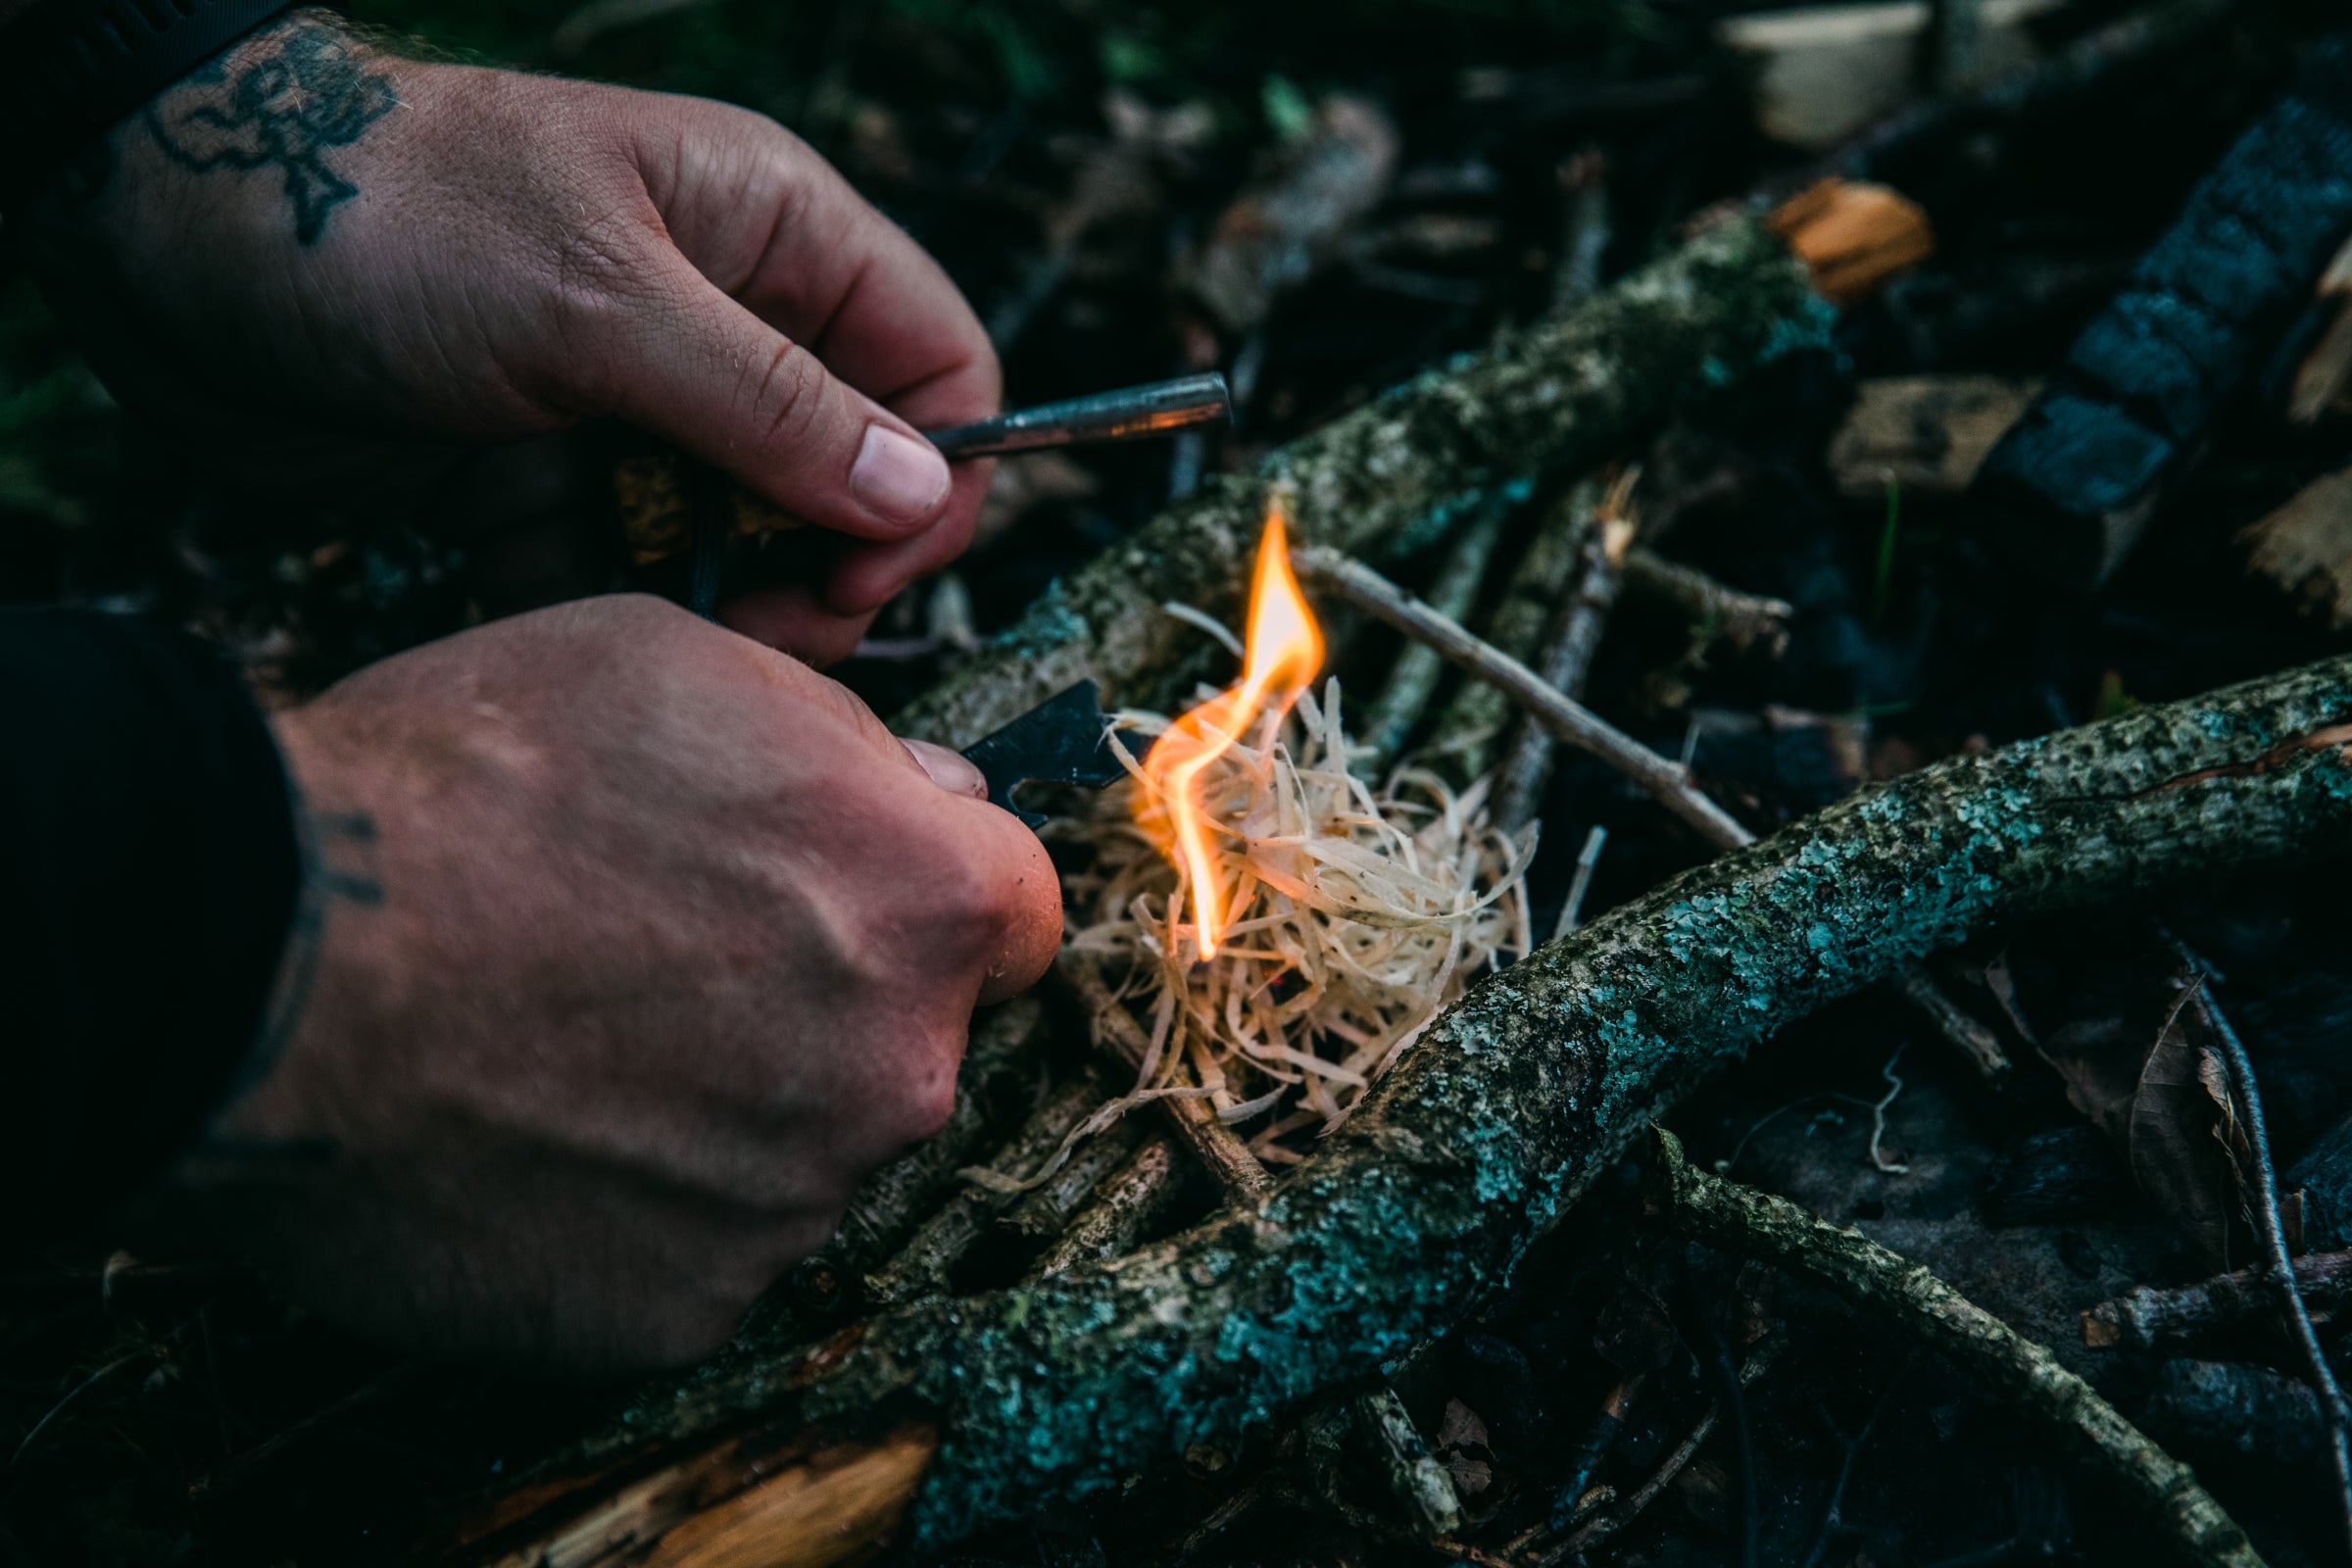 Millican | Close-up of hands using a flint to ignite a small fire on kindling, with a tattoo visible on one hand.